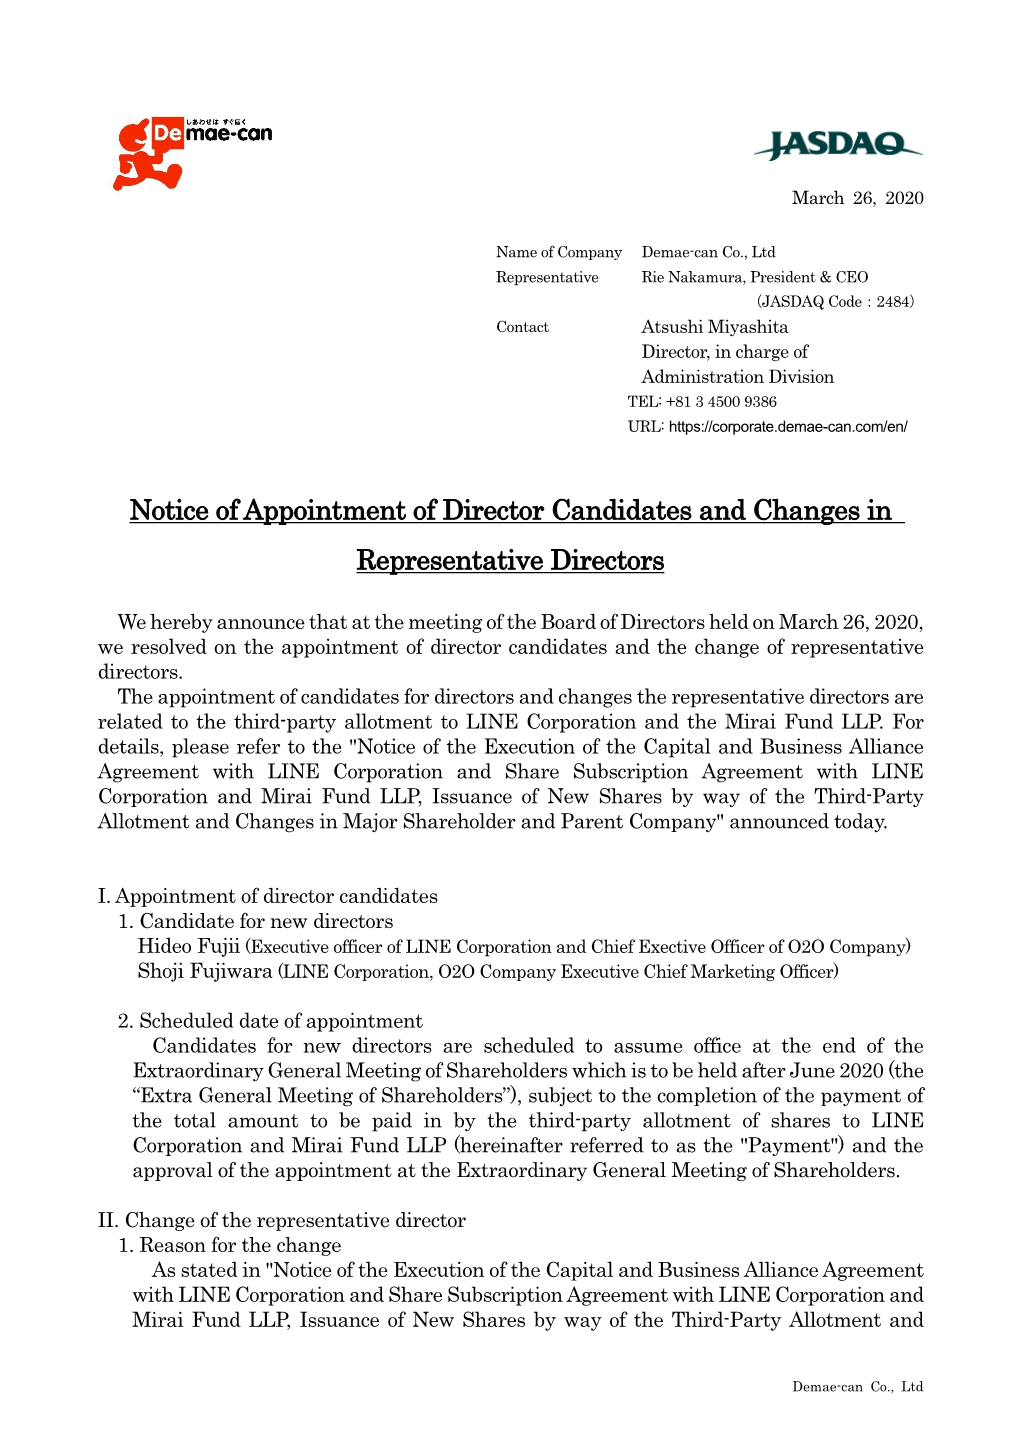 Notice of Appointment of Director Candidates and Changes in Representative Directors